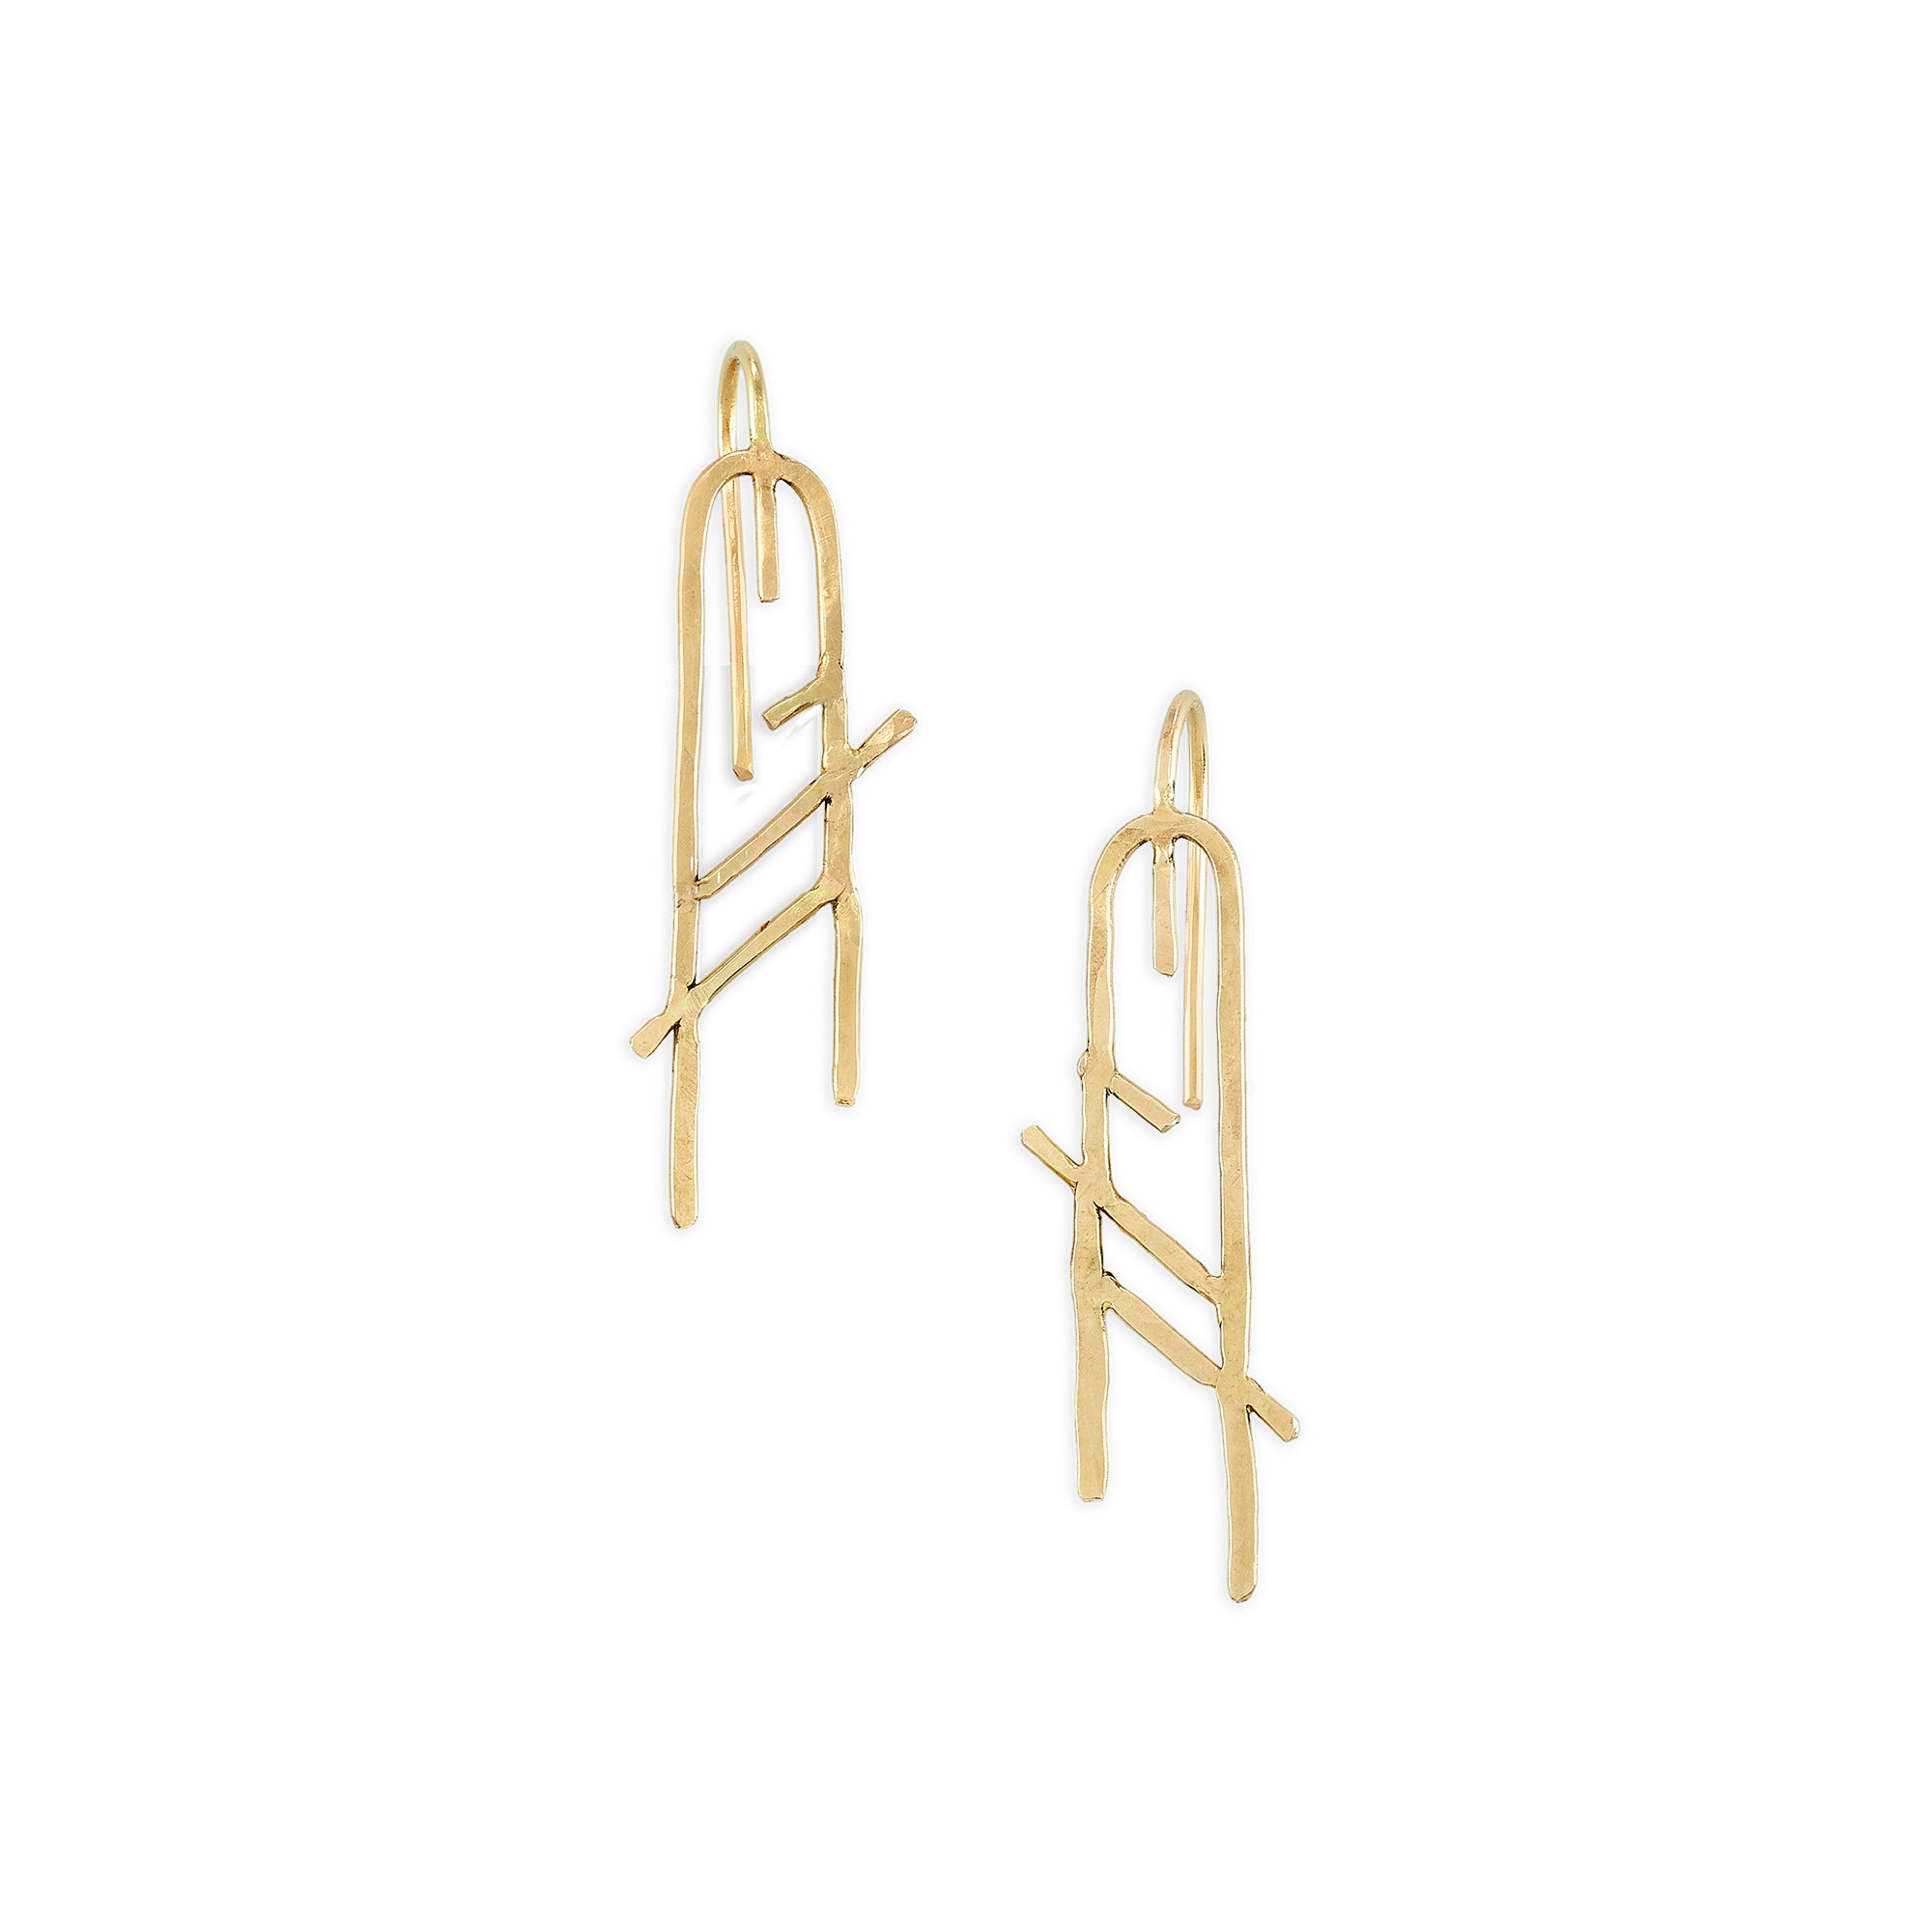 Moab Hook Earrings in 14k gold, these delicate one-of-a-kind earrings are from our collaboration with Callen Thompson 